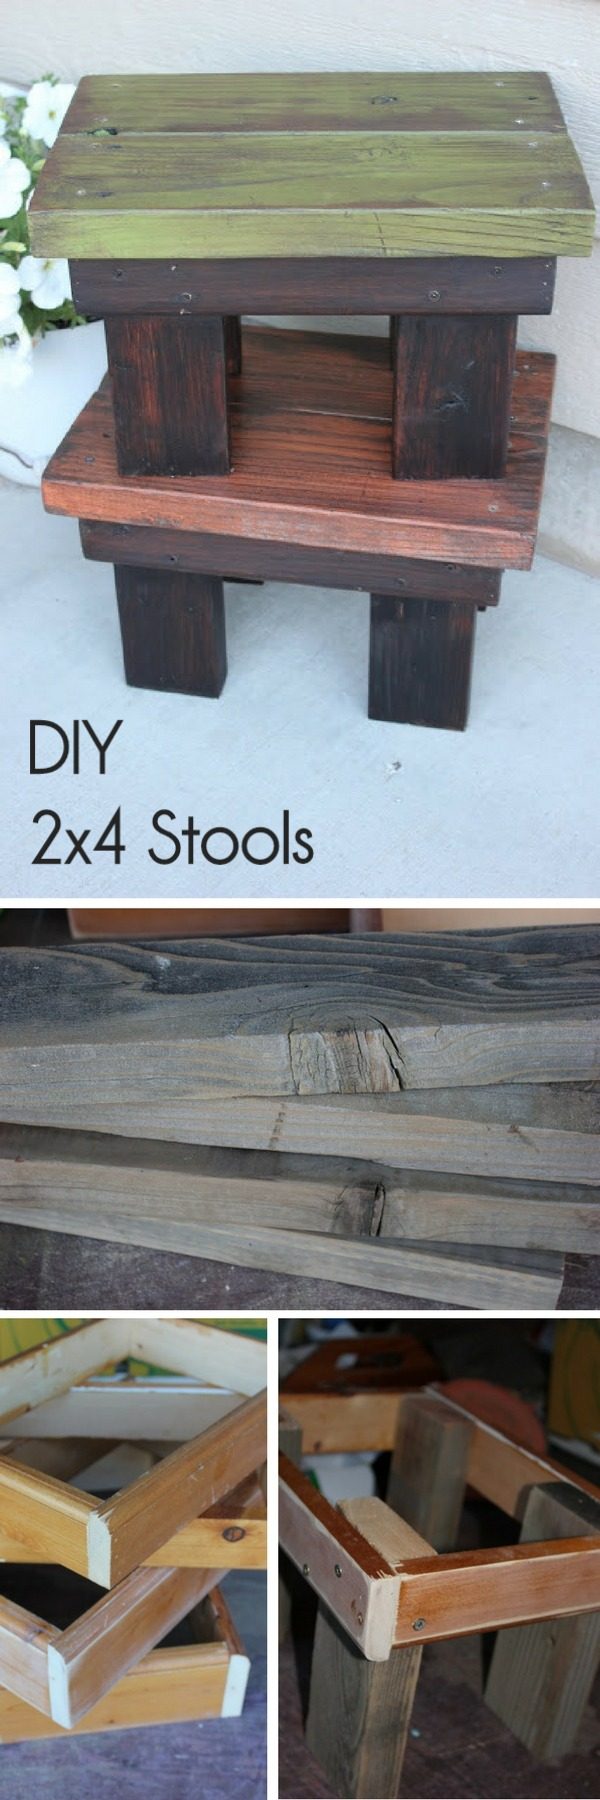 20 Crafty 2x4 DIY Projects That You Can Easily Make - Check out how to make   stools from 2x4s 